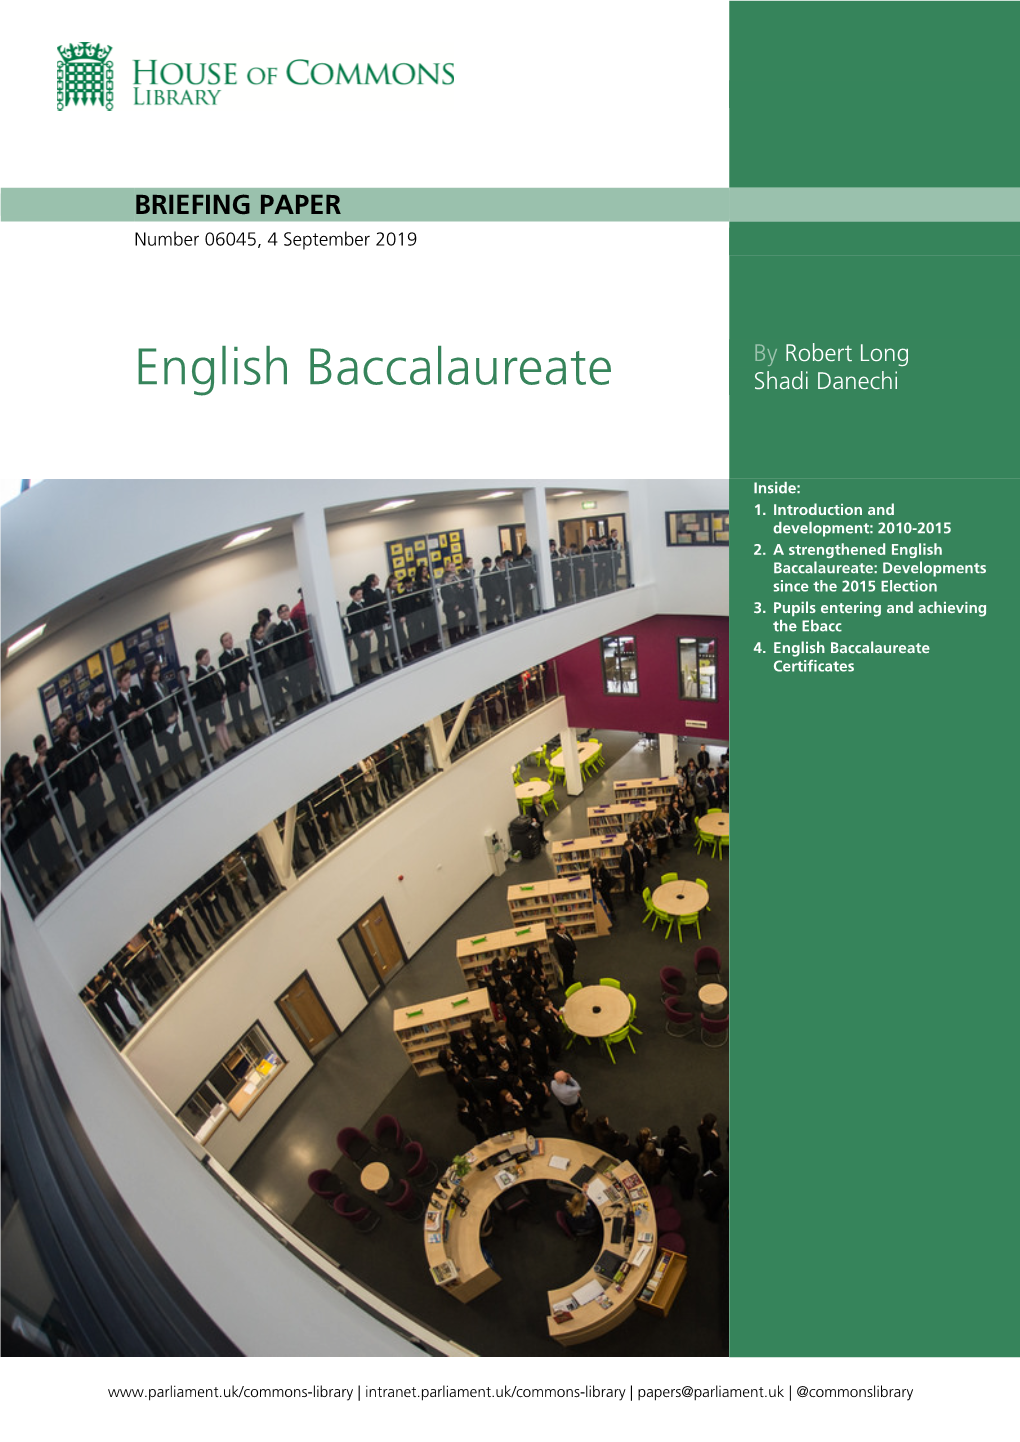 English Baccalaureate (Ebacc) Is a Performance Measure for Schools in England, First Applied in the 2010 School Performance Tables